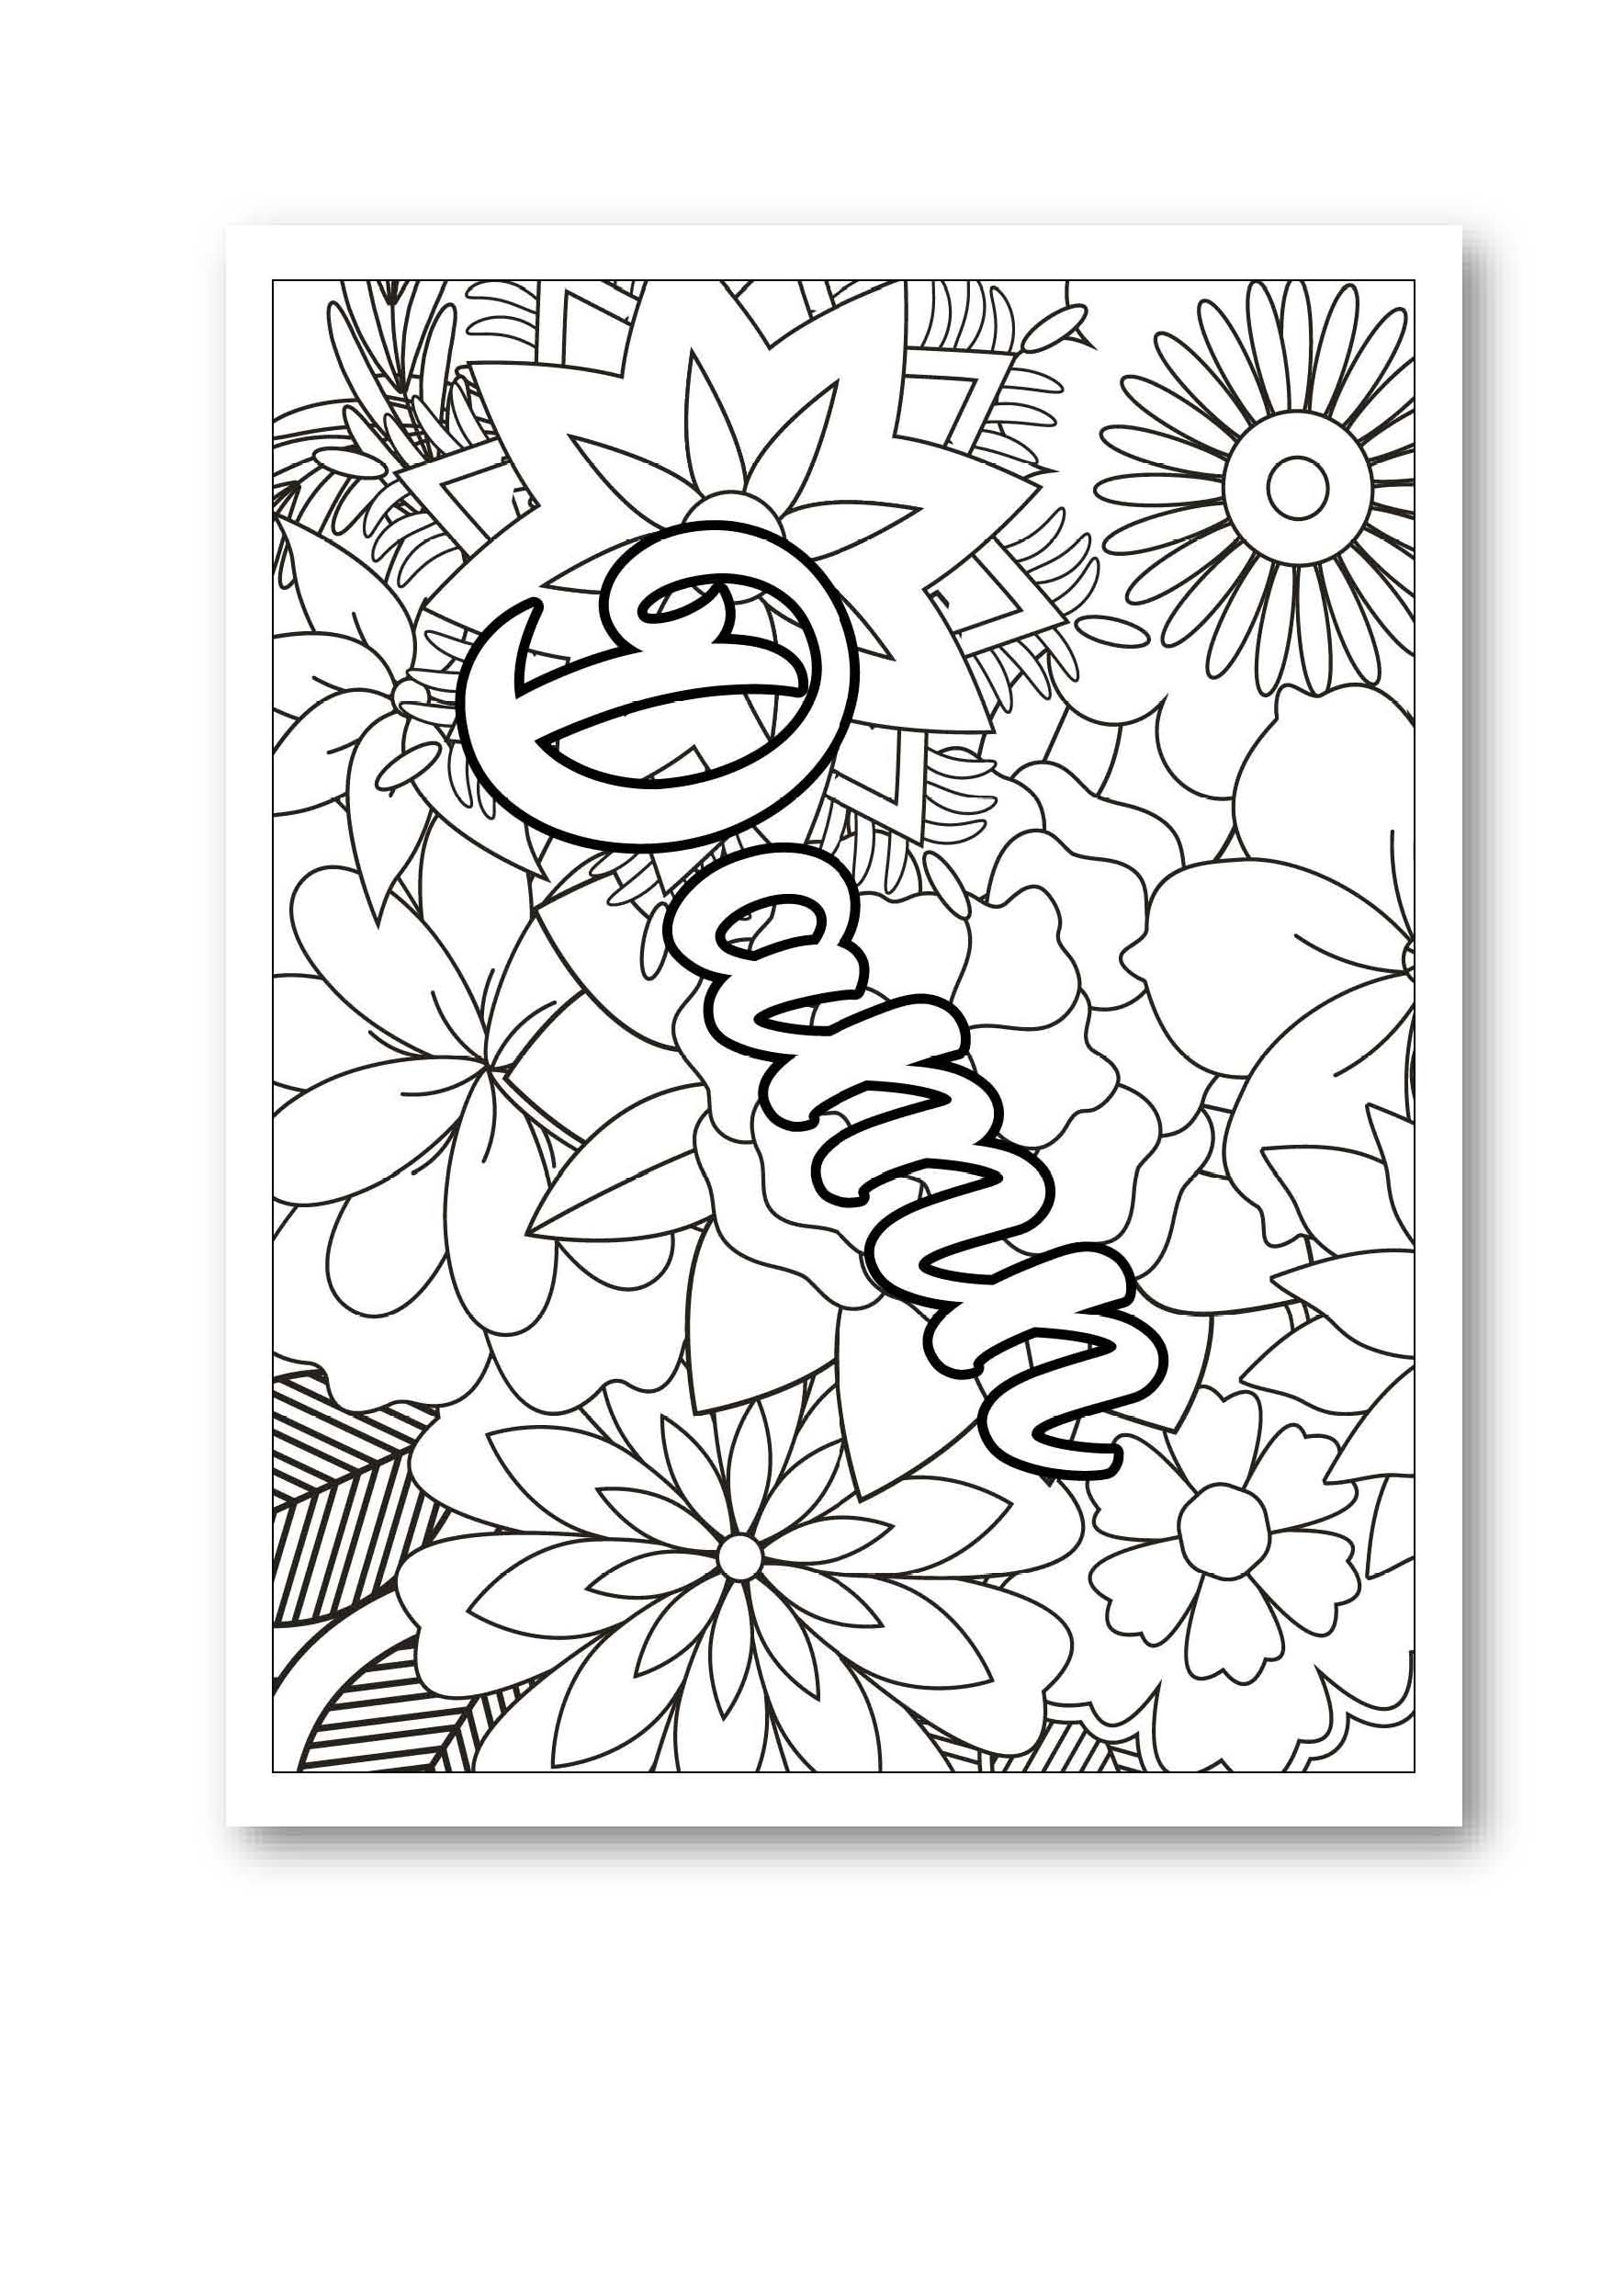 FREE Printable Coloring Pages for Adults with Swear Words!